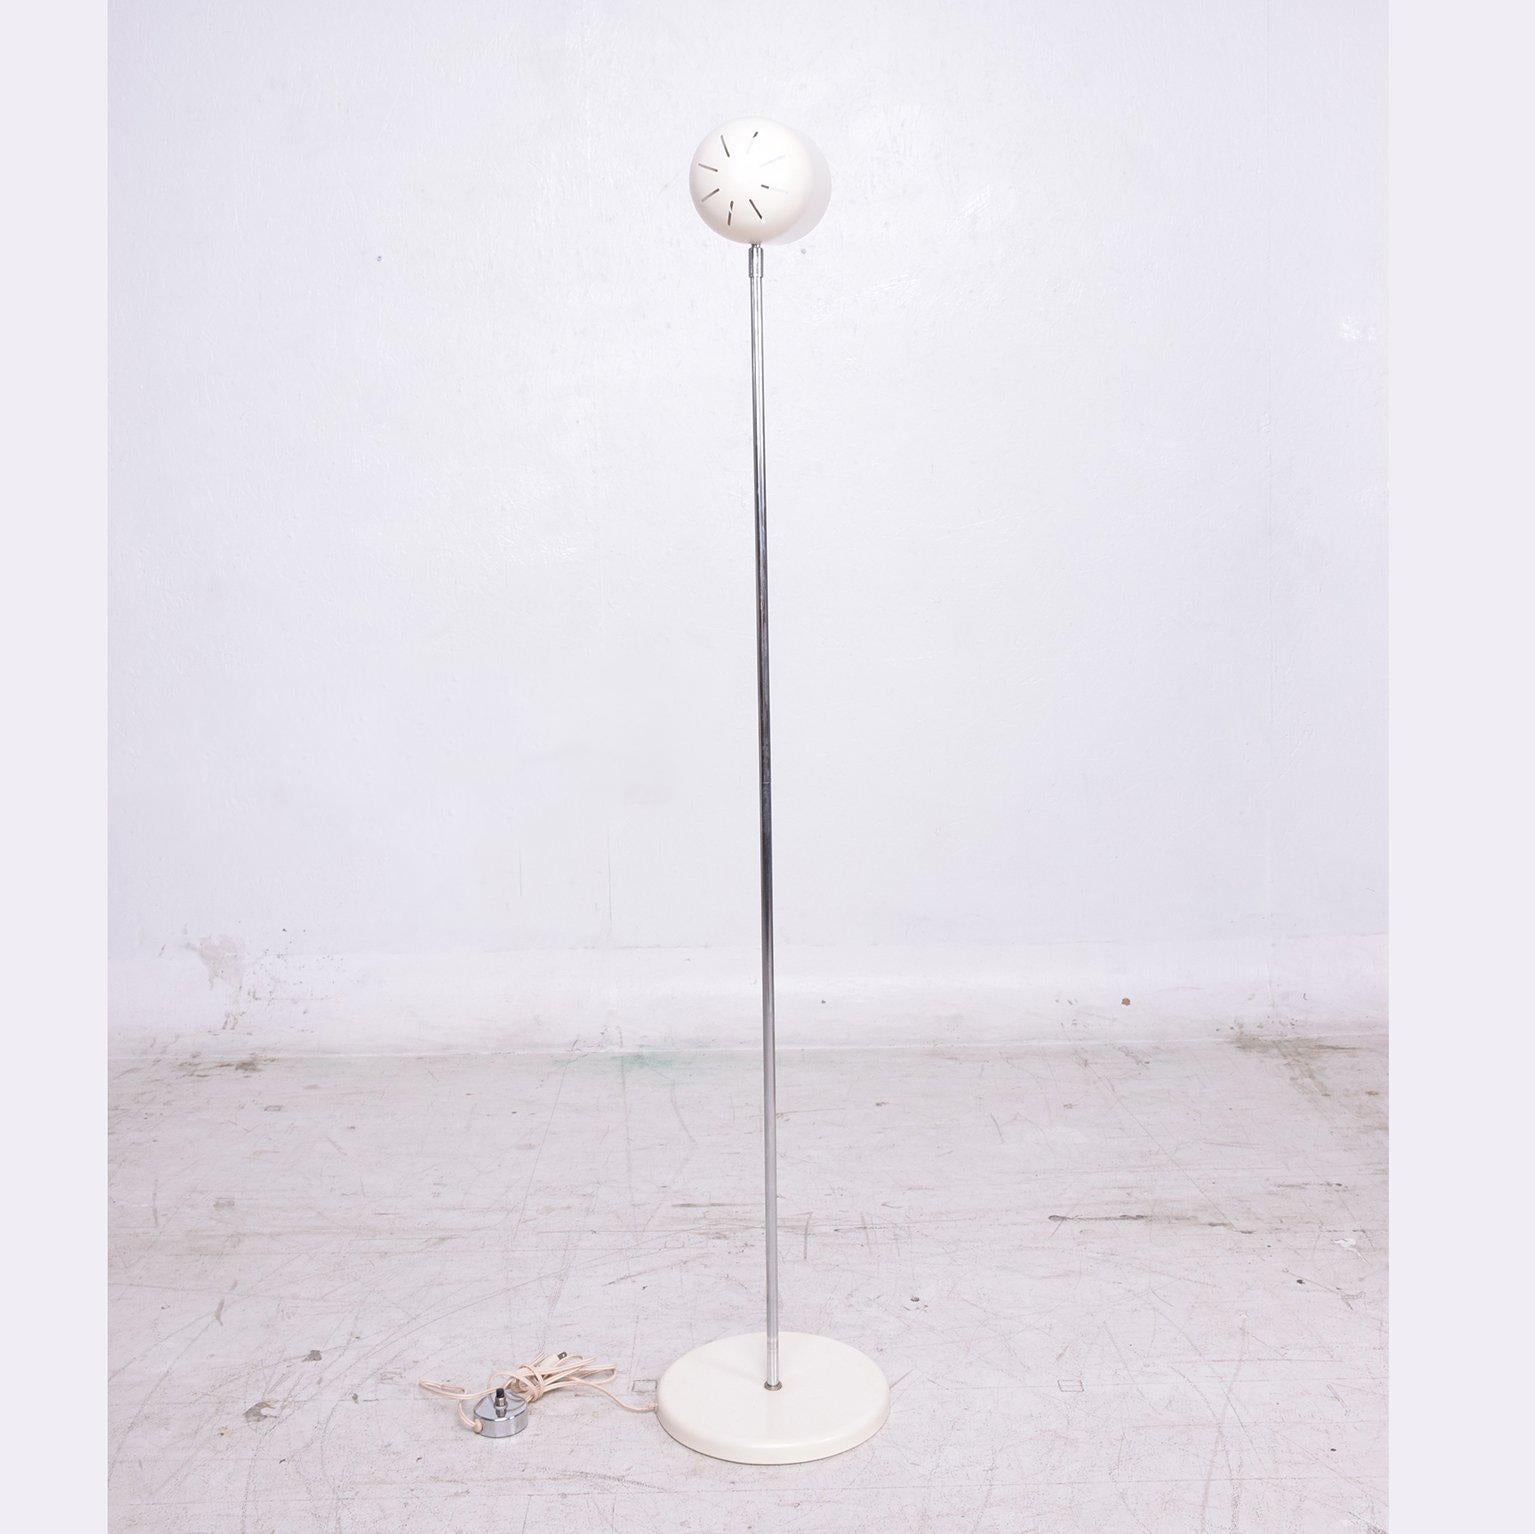 For yoru consideration a pair of Mid-Century period floor lamps.
Chrome stem and hardware with aluminum shade and base painted (light green and white).
Unmarkred, no information on the maker, USA, circa 1960s.
Lamps have been tested and currently